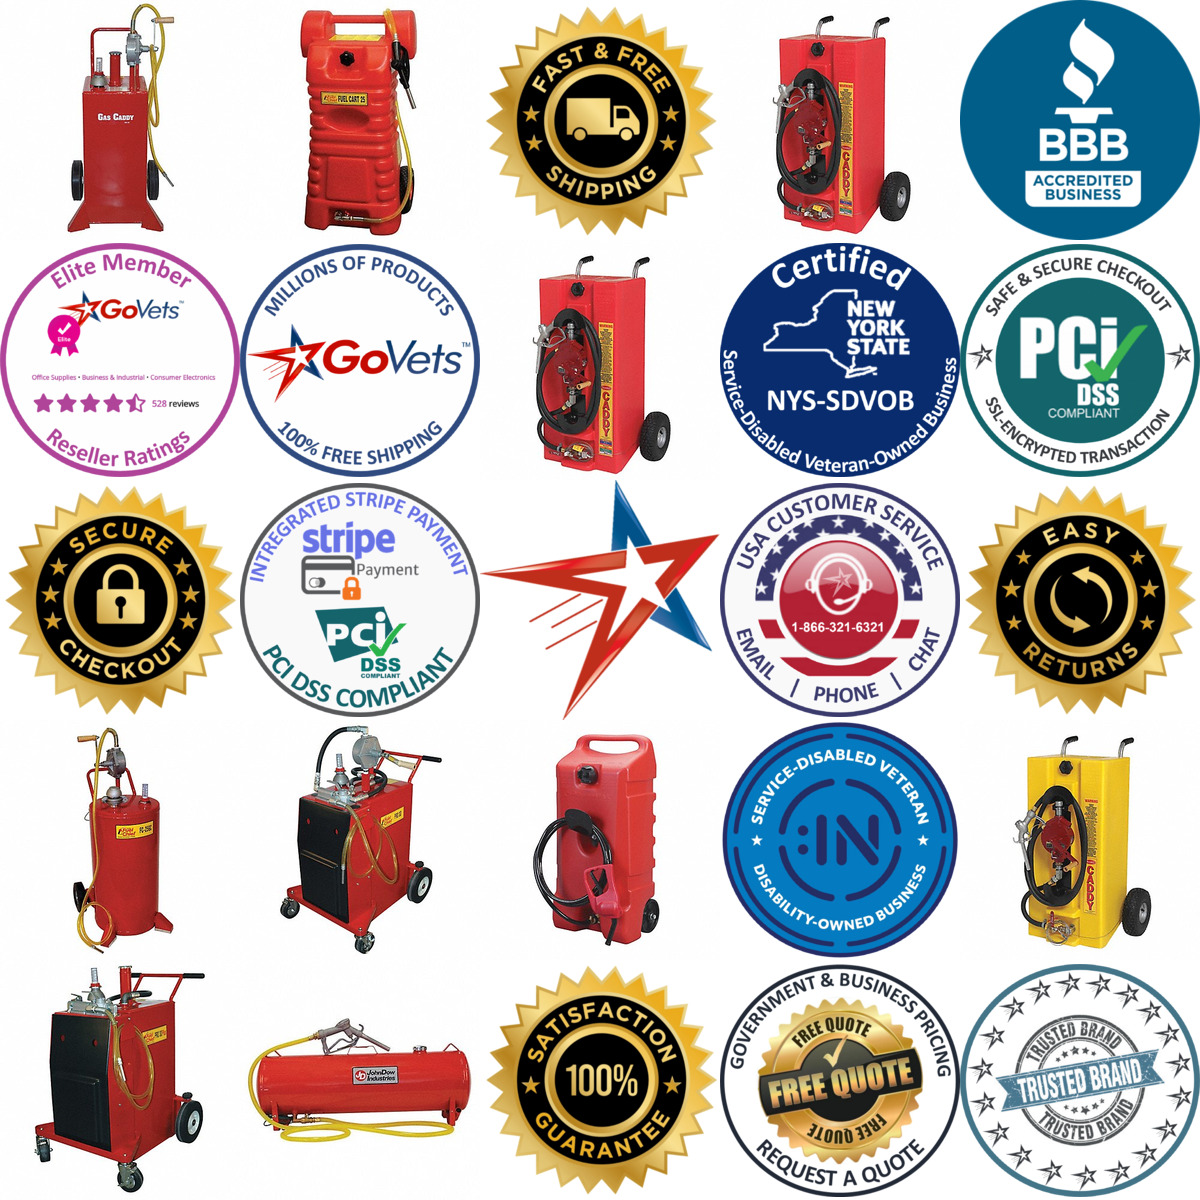 A selection of Fuel Caddies products on GoVets